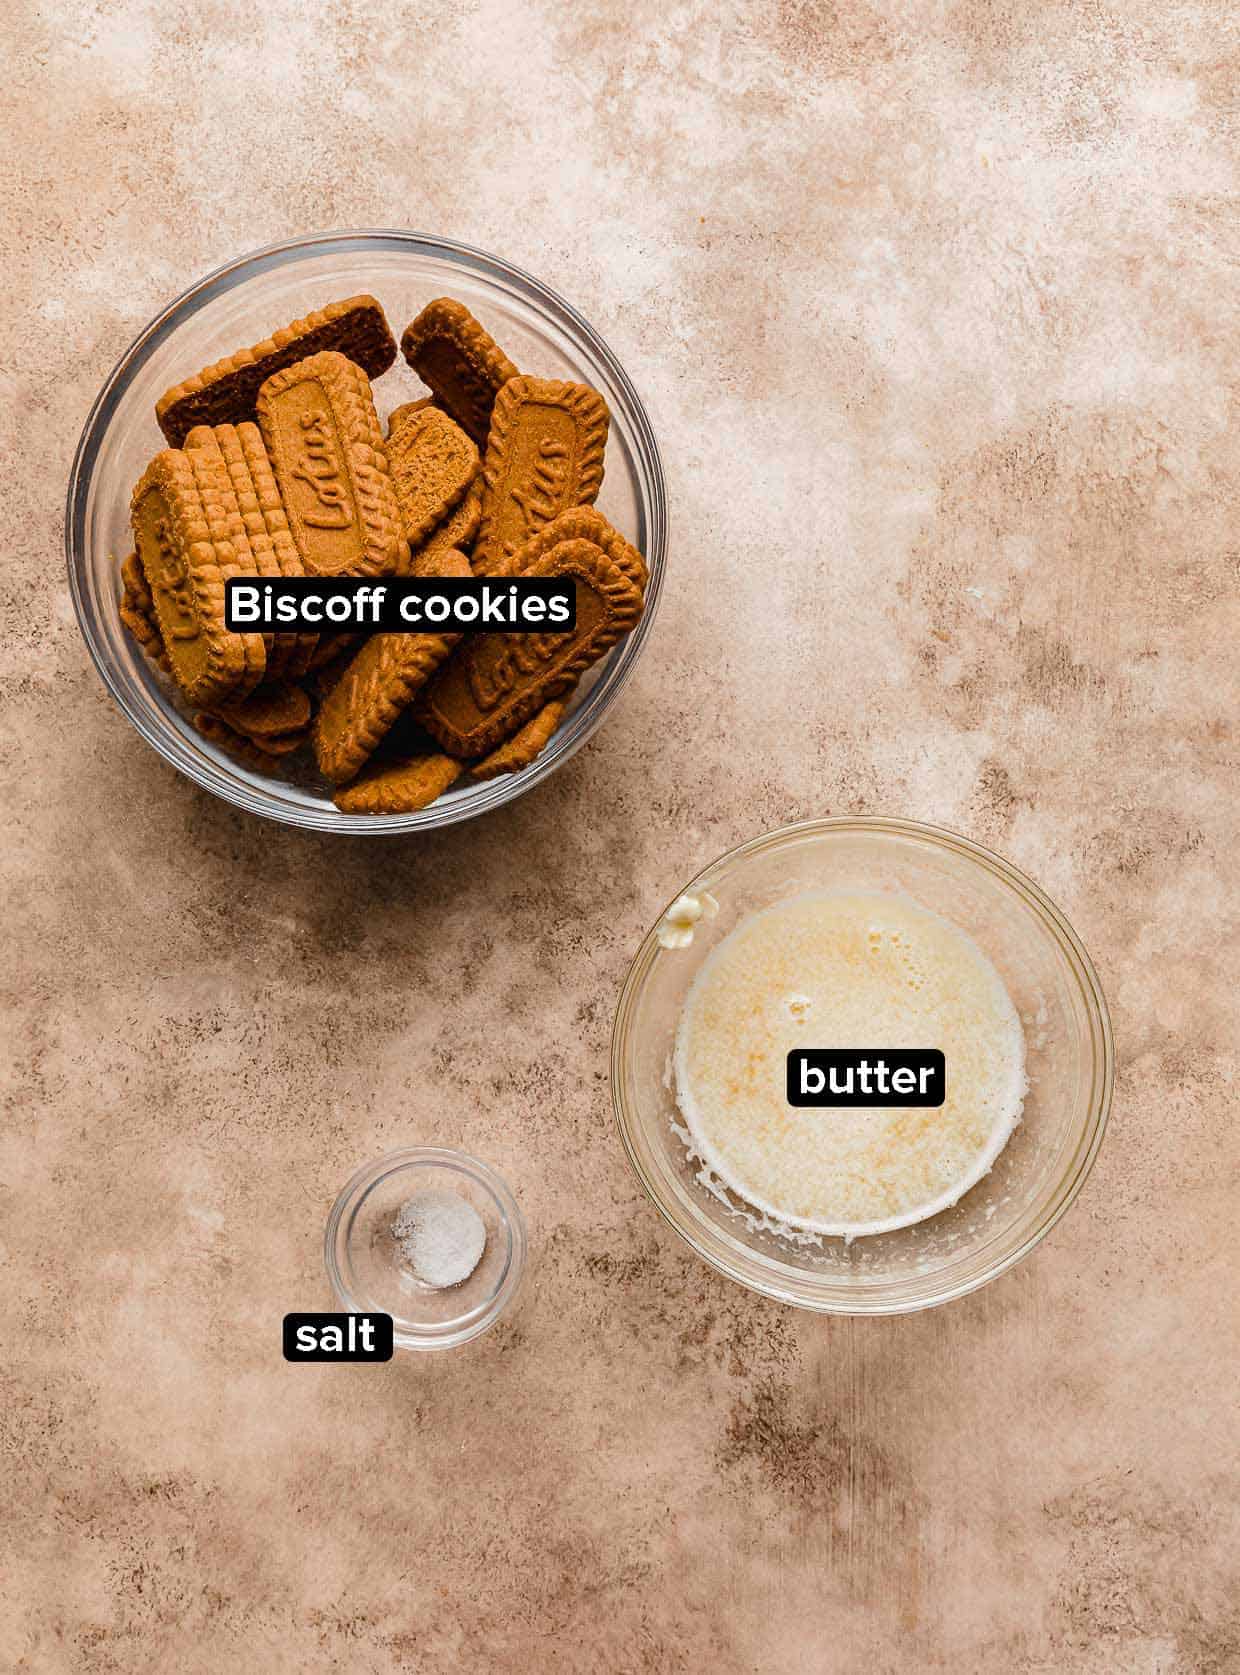 Biscoff Pie Crust ingredients: biscoff cookies, melted butter, and salt, on a brown background.